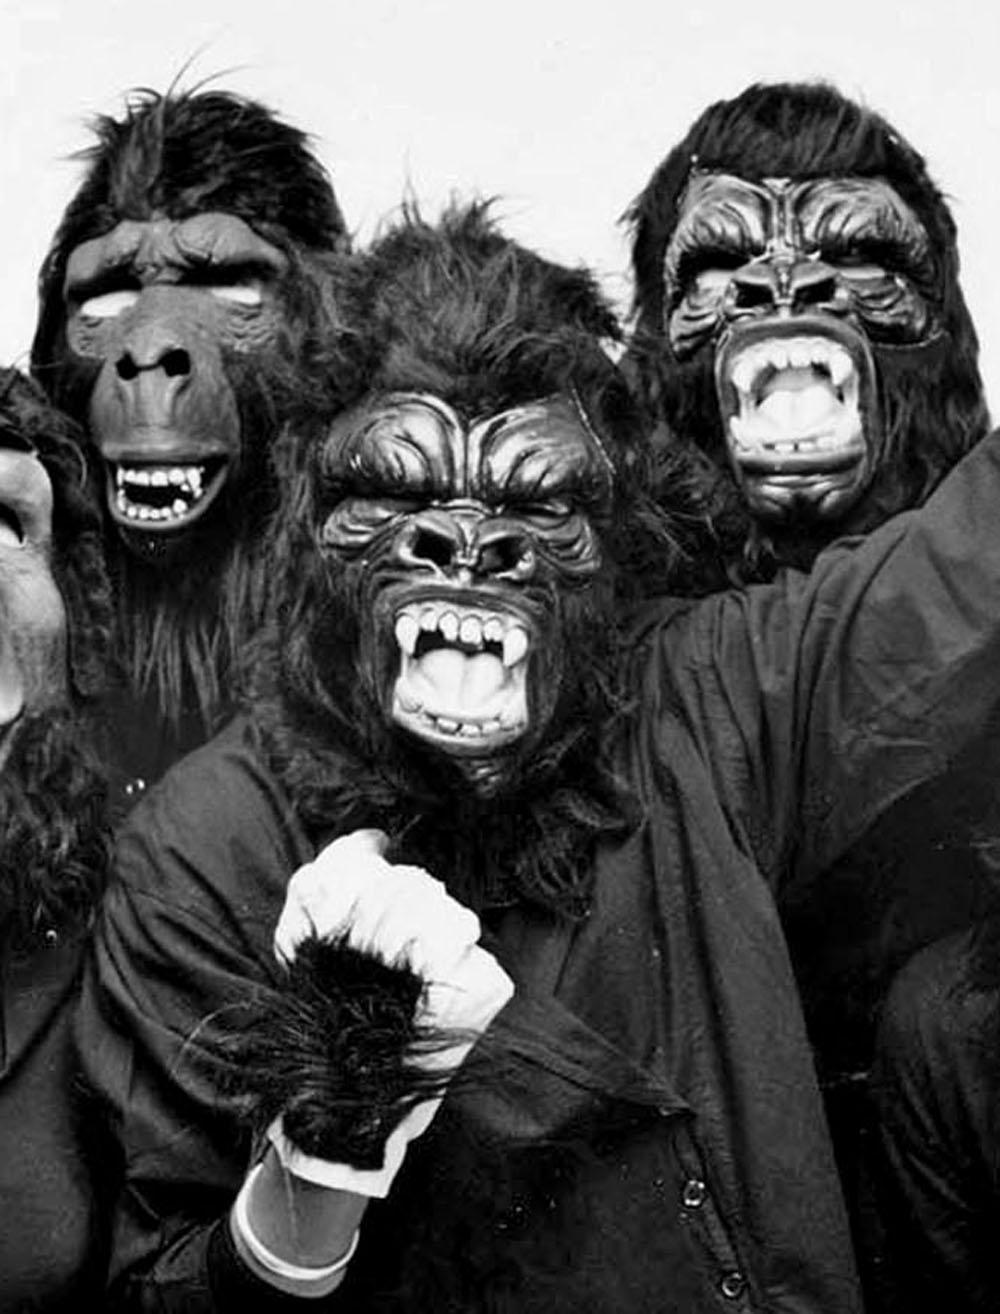 The Guerrilla Girls, anonymous feminist, female activist artist group - Photograph by Jack Mitchell